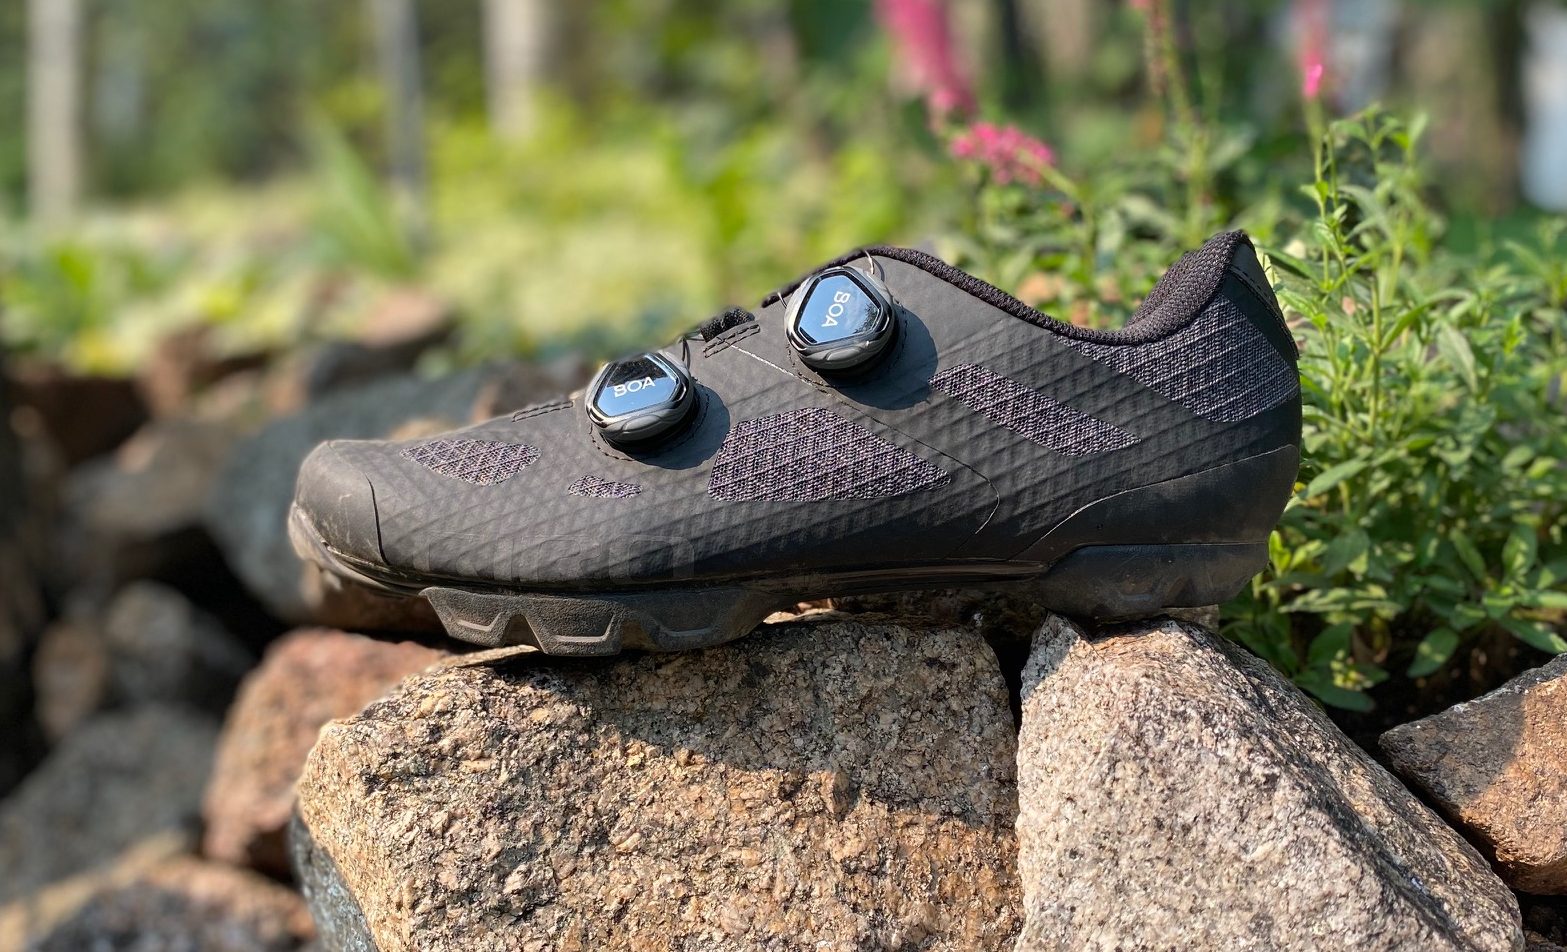 The Giro Sector the Coolest MTB Shoe of the Season | Gear Institute